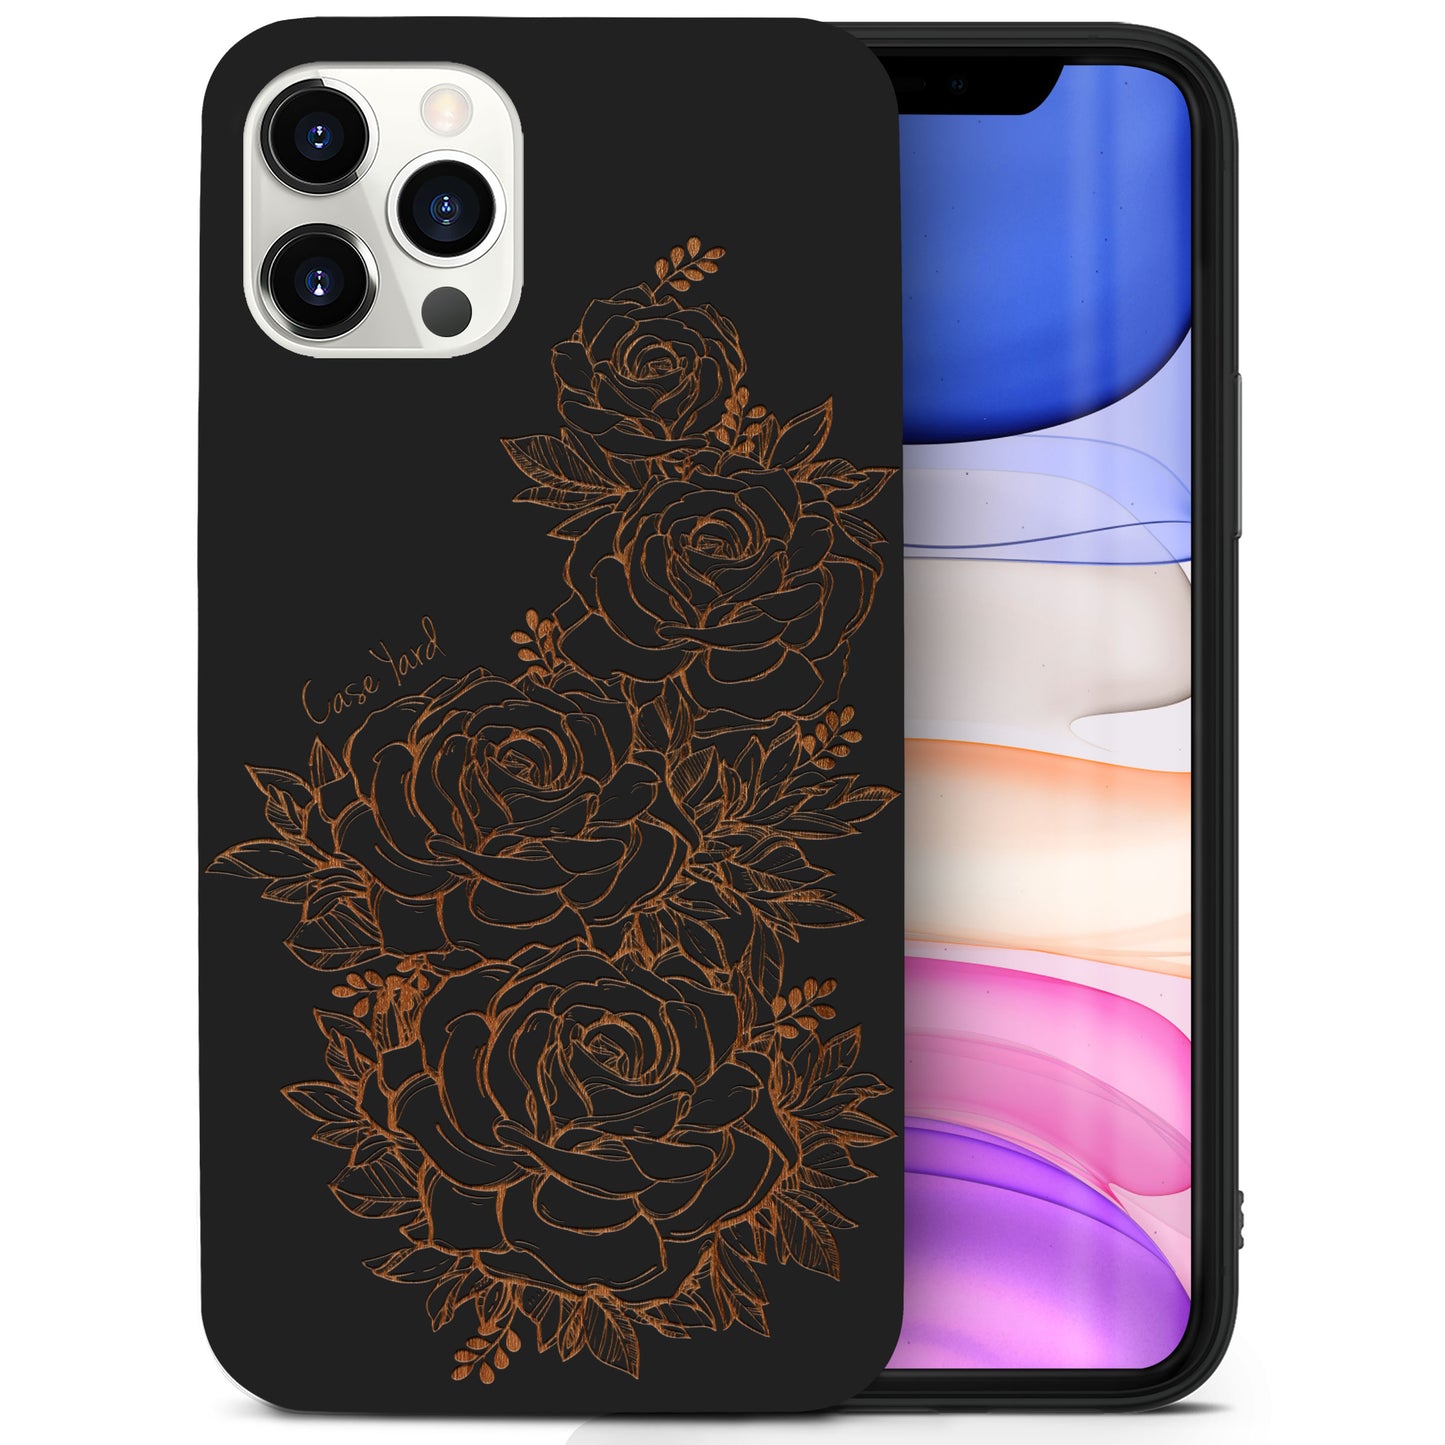 Wooden Cell Phone Case Cover, Laser Engraved case for iPhone & Samsung phone Victorian Roses Design